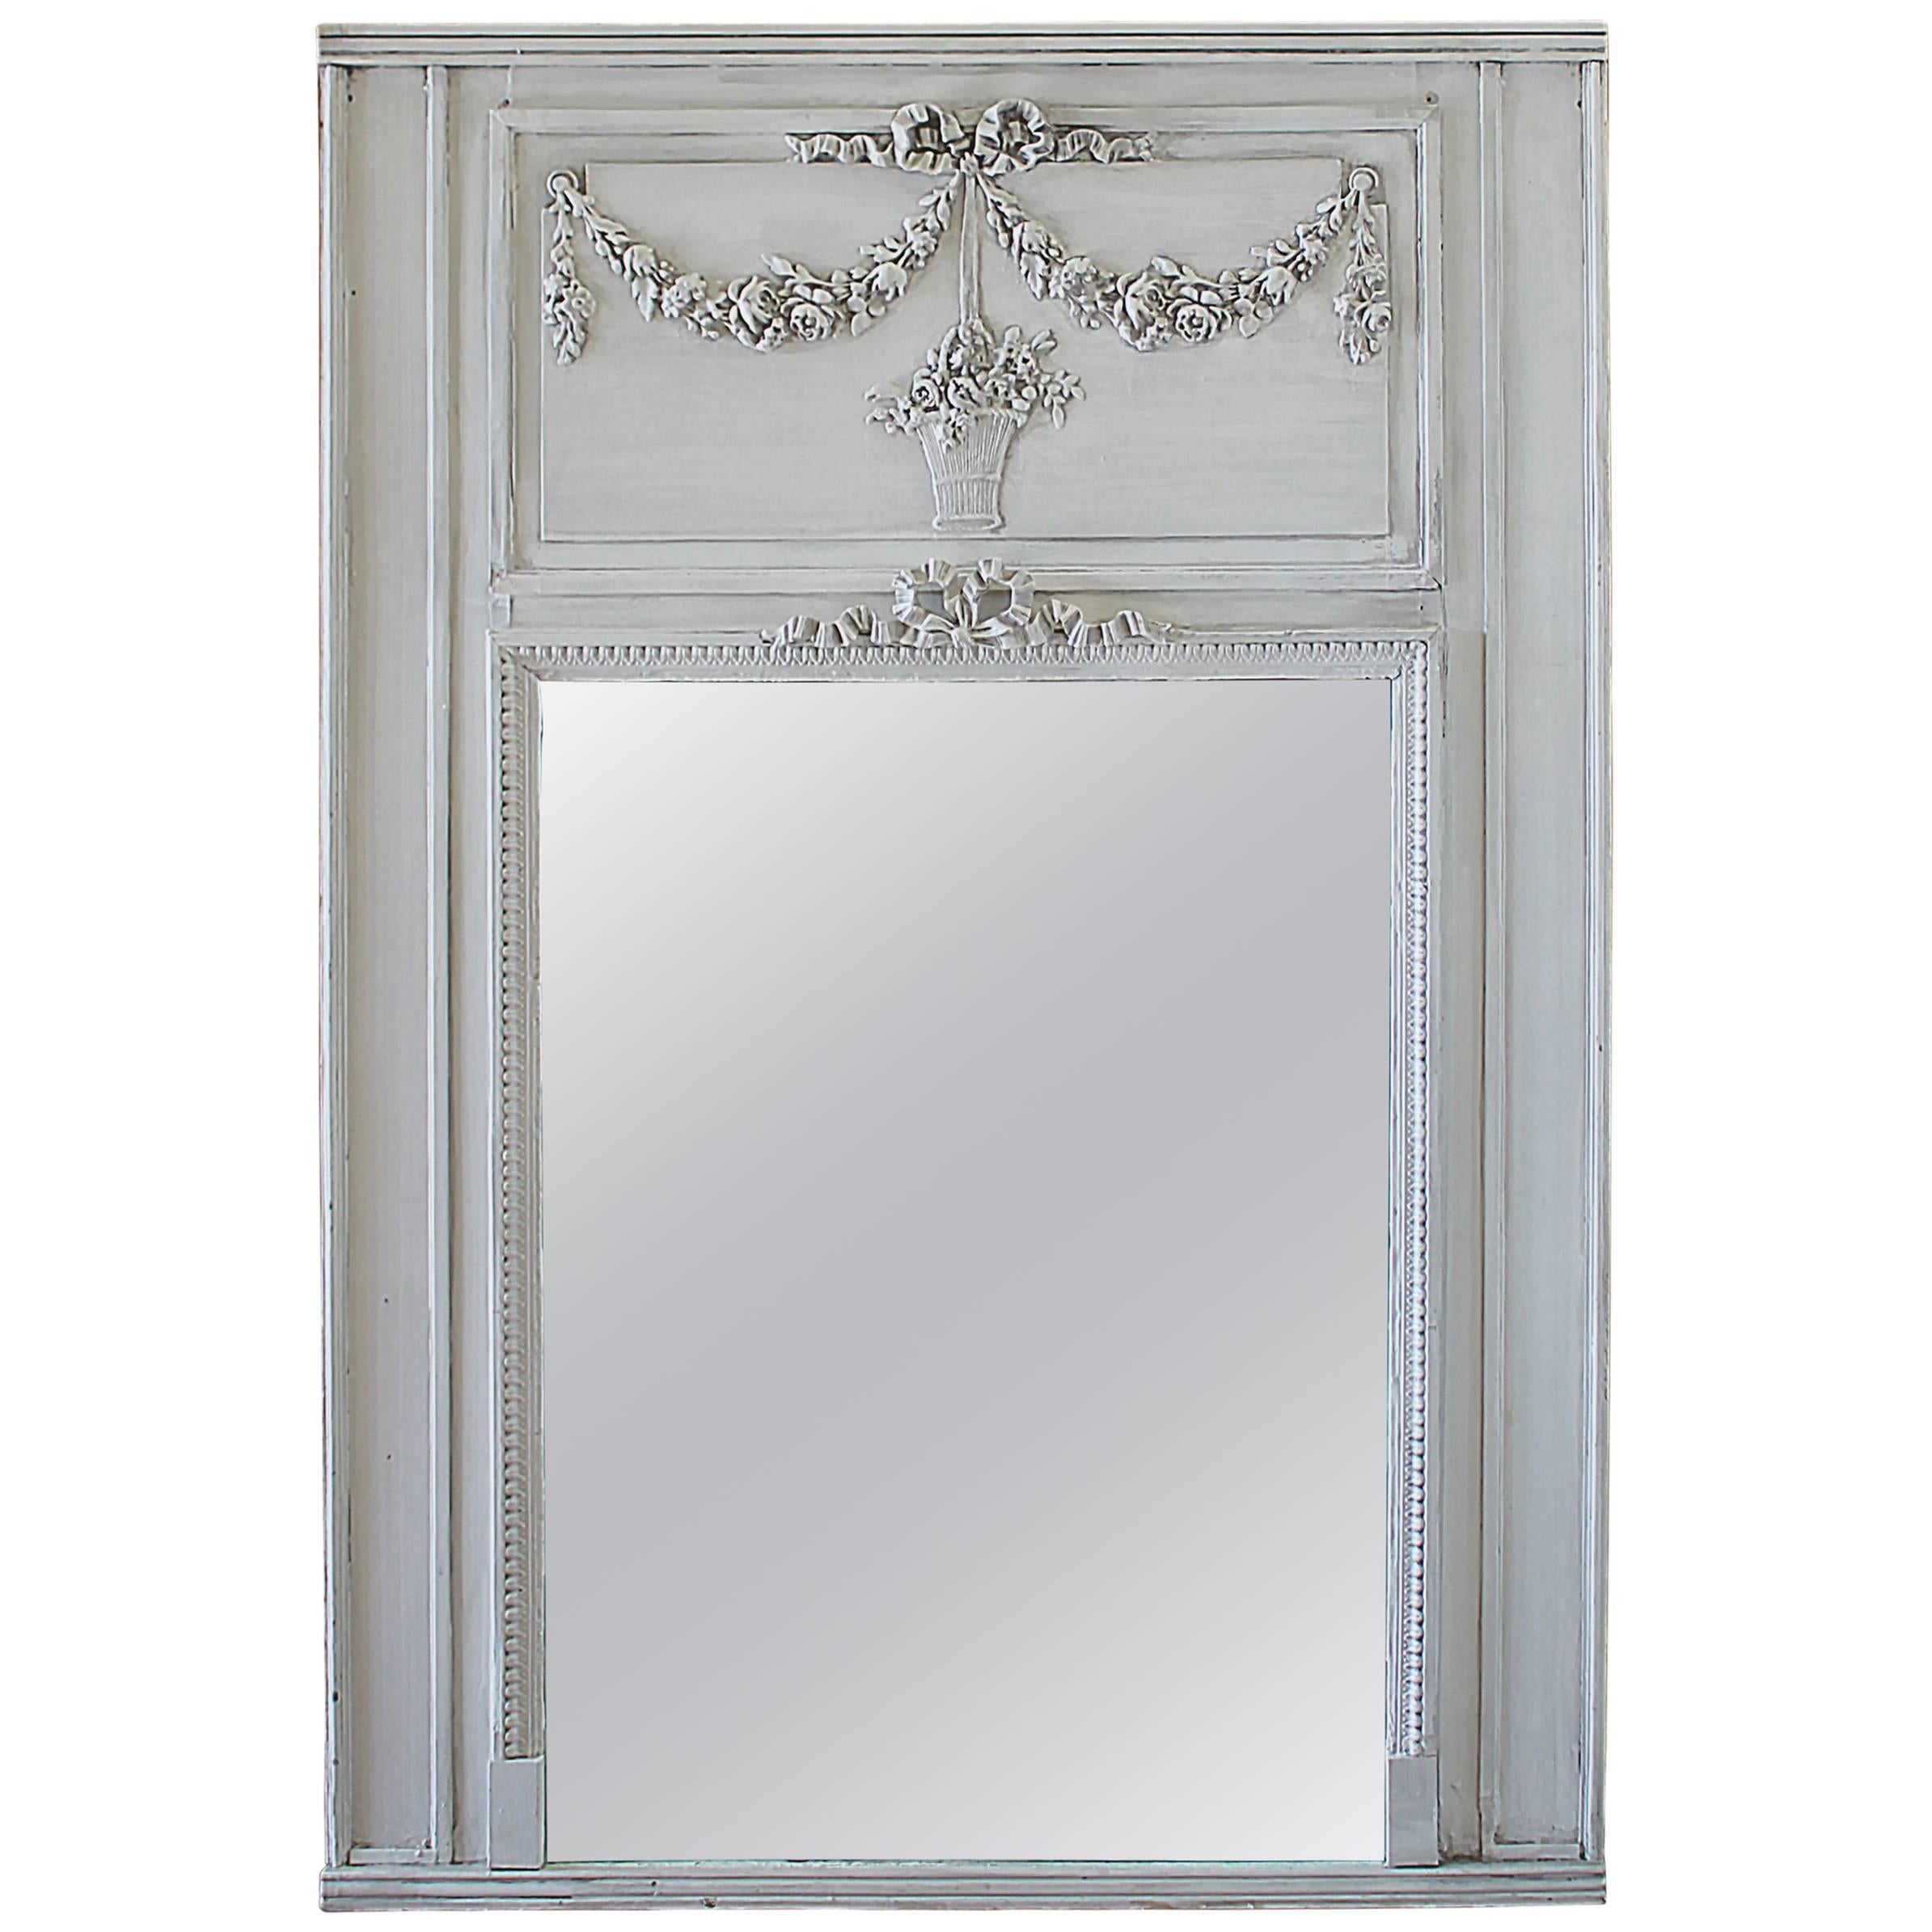 Early 20th Century Painted and Carved Trumeau Mirror